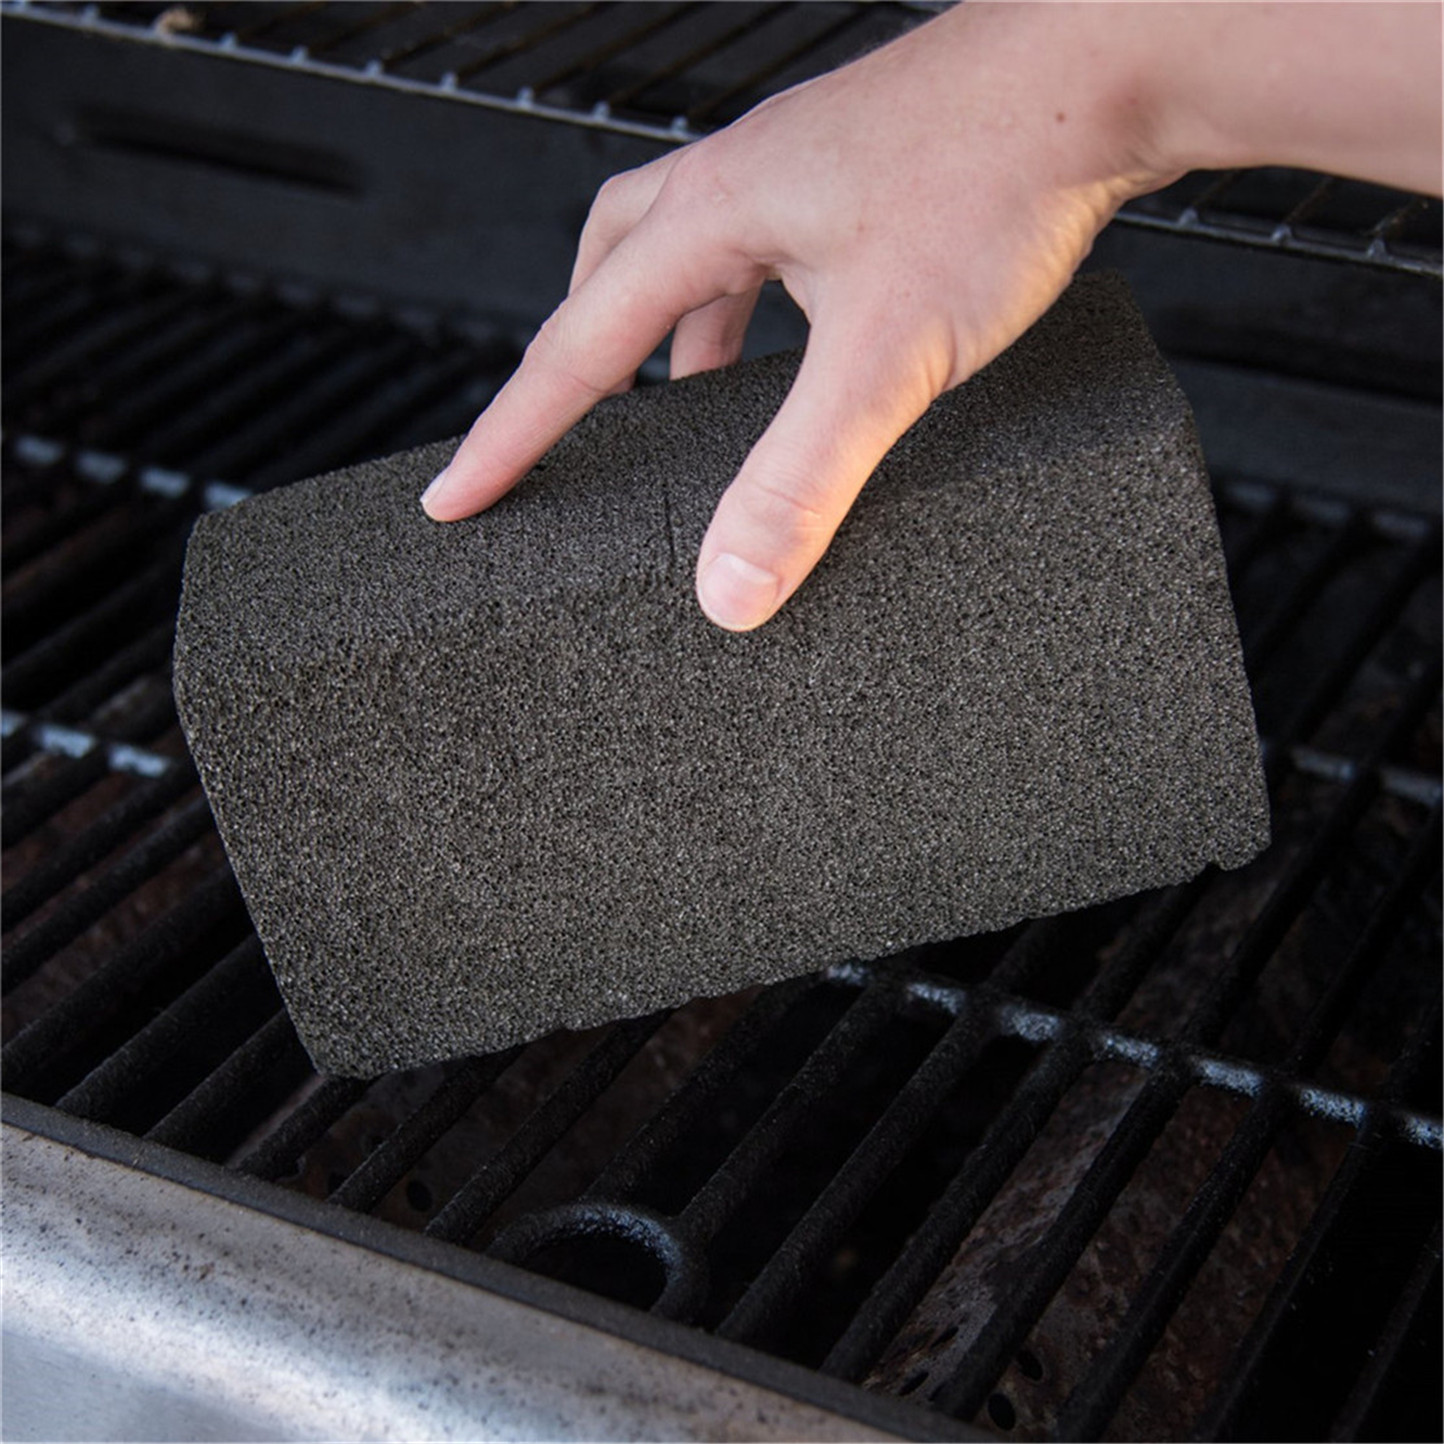 Abrasive Stone for Crepe Maker Cleaning